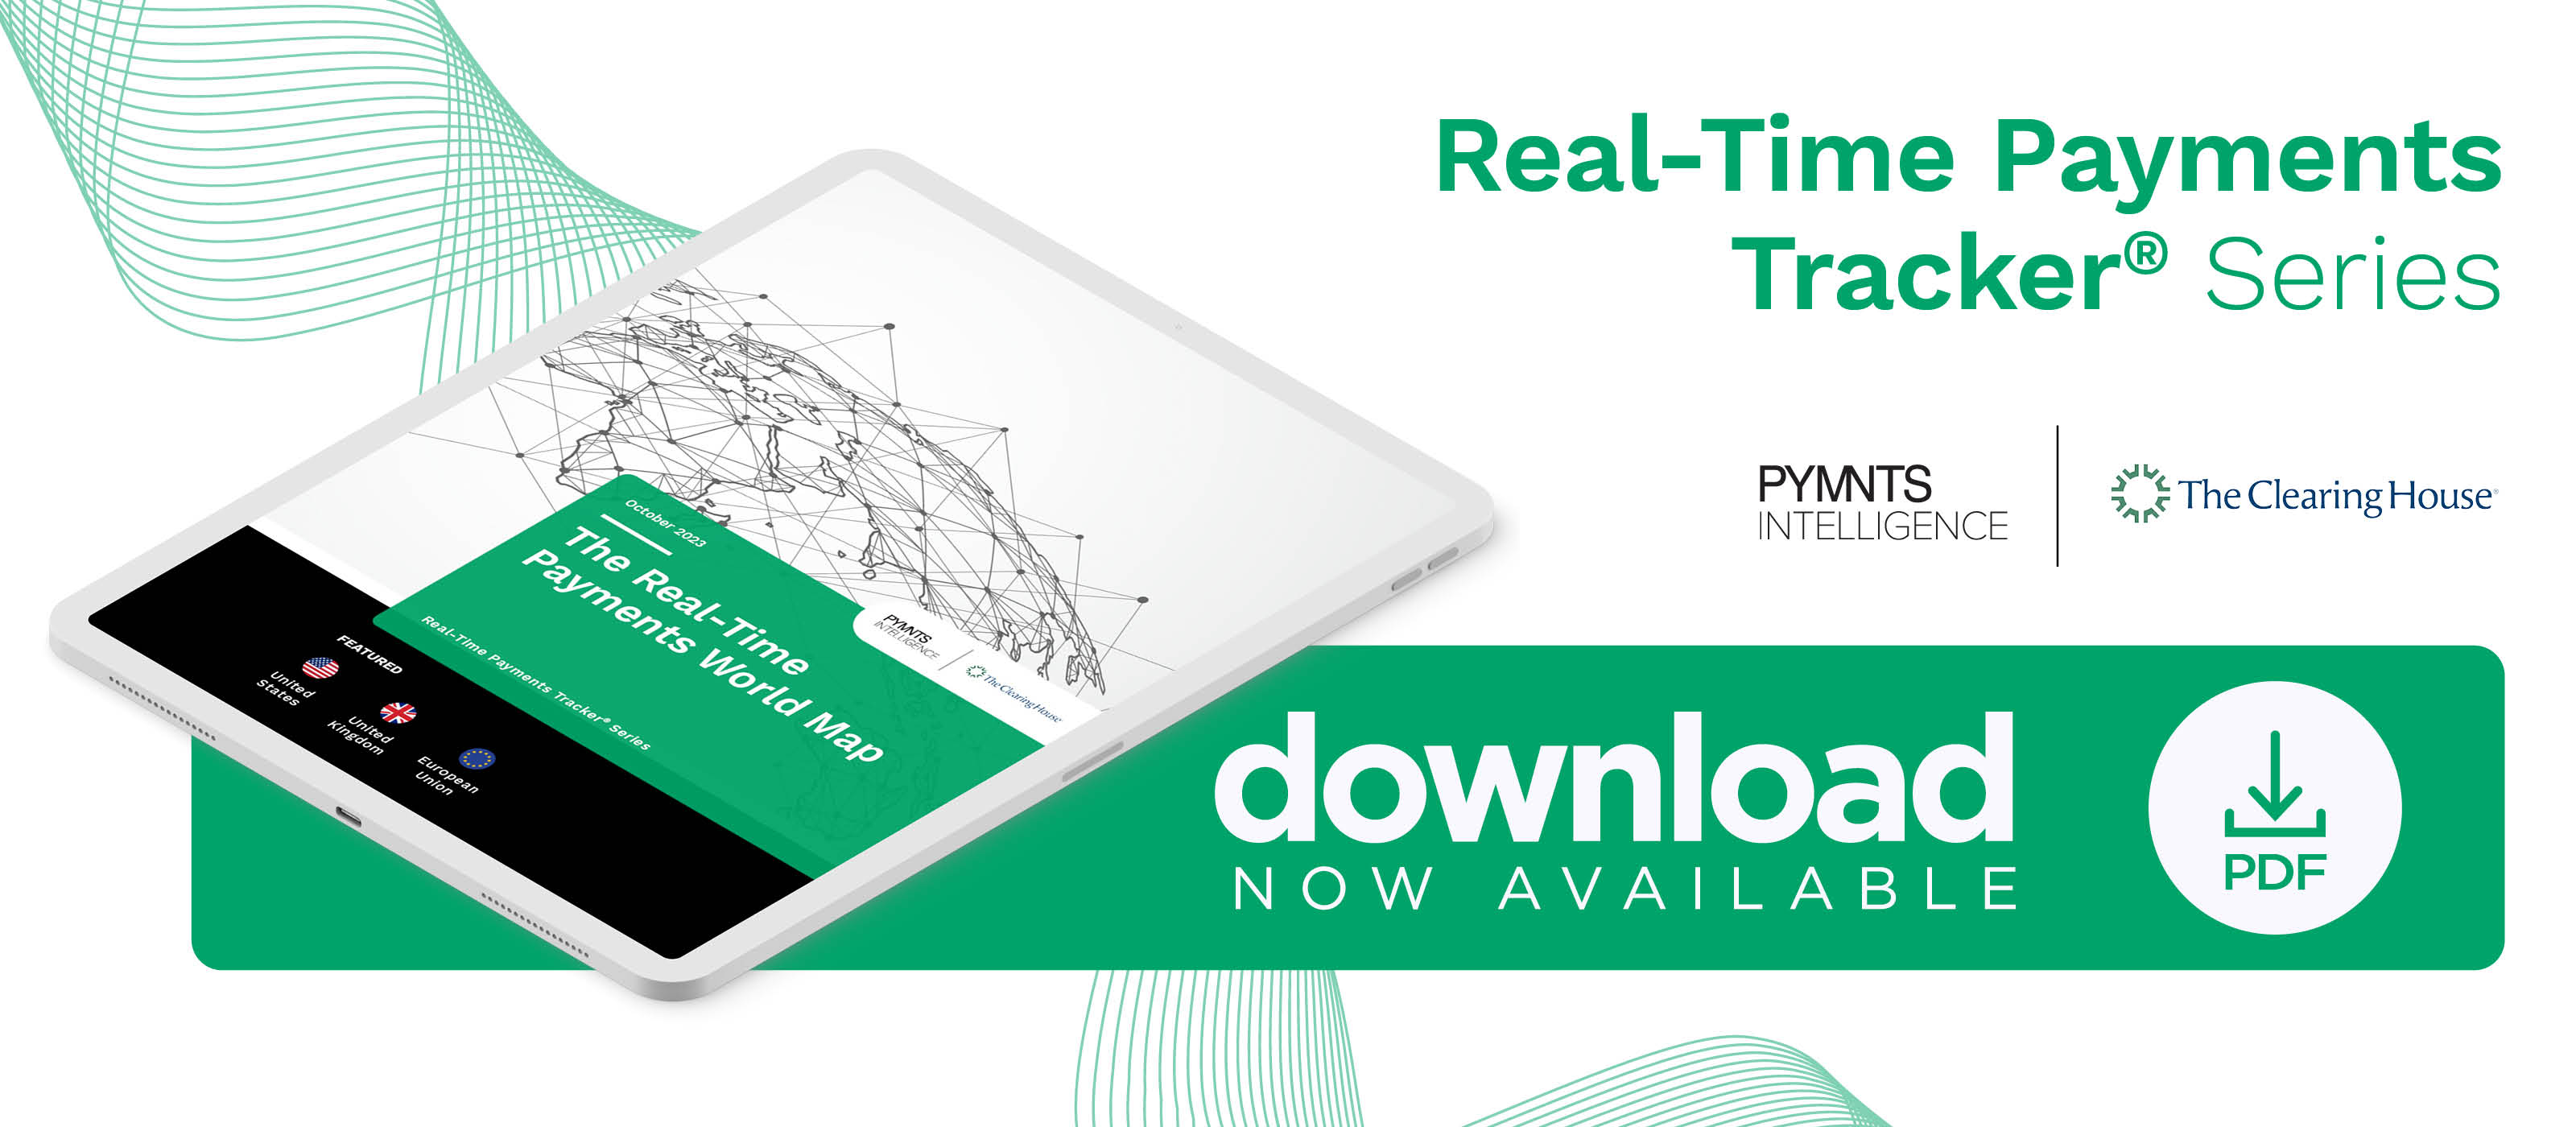 Real-time payments are growing worldwide. This edition features real-time payments news in the United States, the United Kingdom and the European Union.